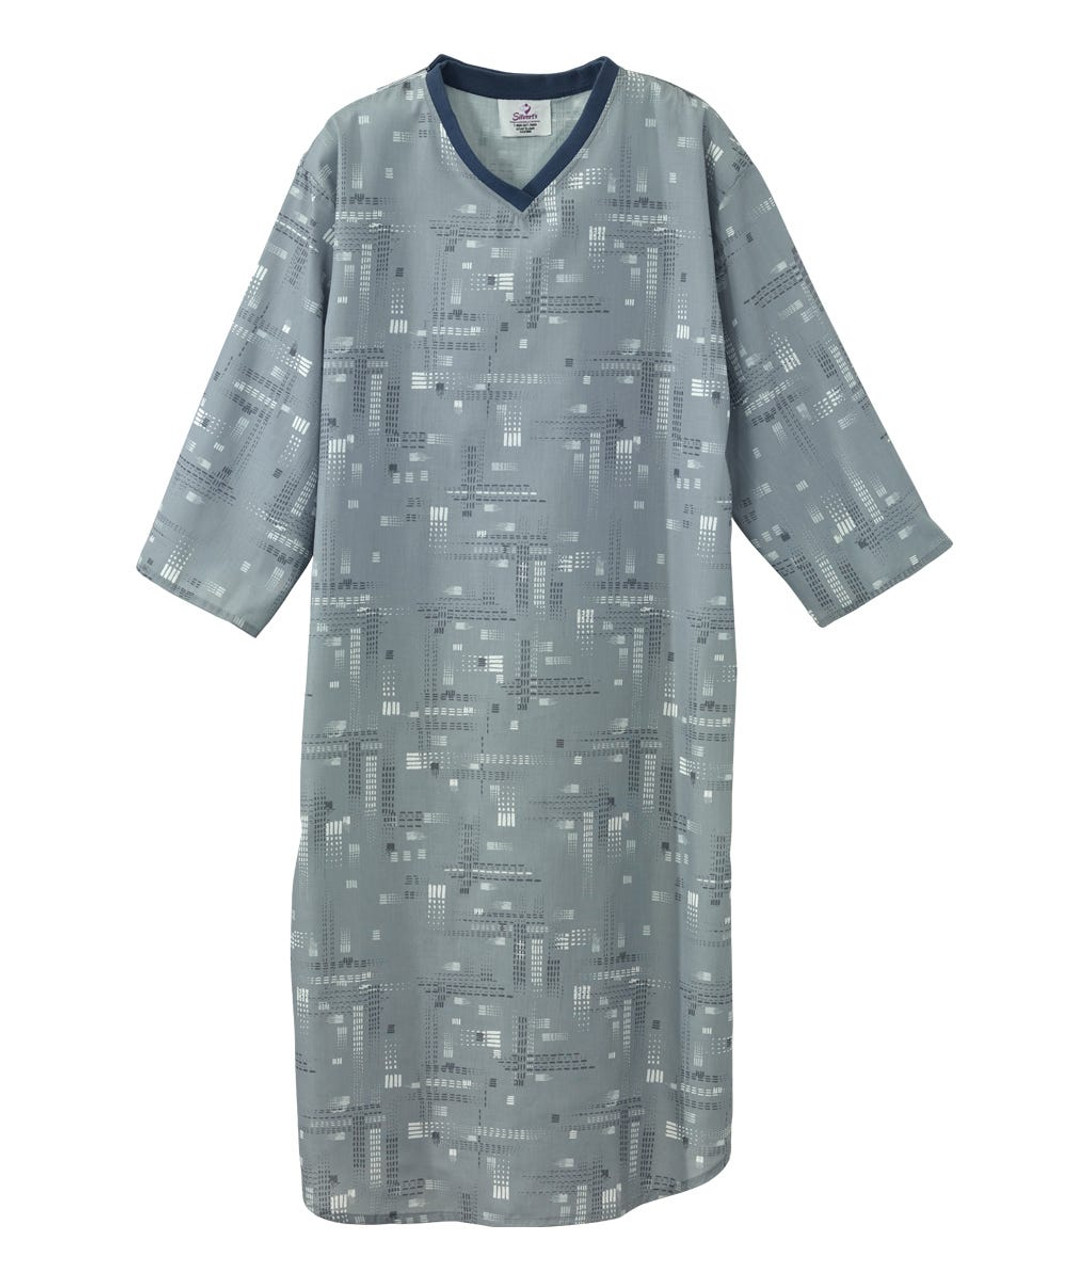 Silverts SV50050 Poly-Cotton Hospital Gowns for Men Gray/White, Size=M, SV50050-SV1295-M